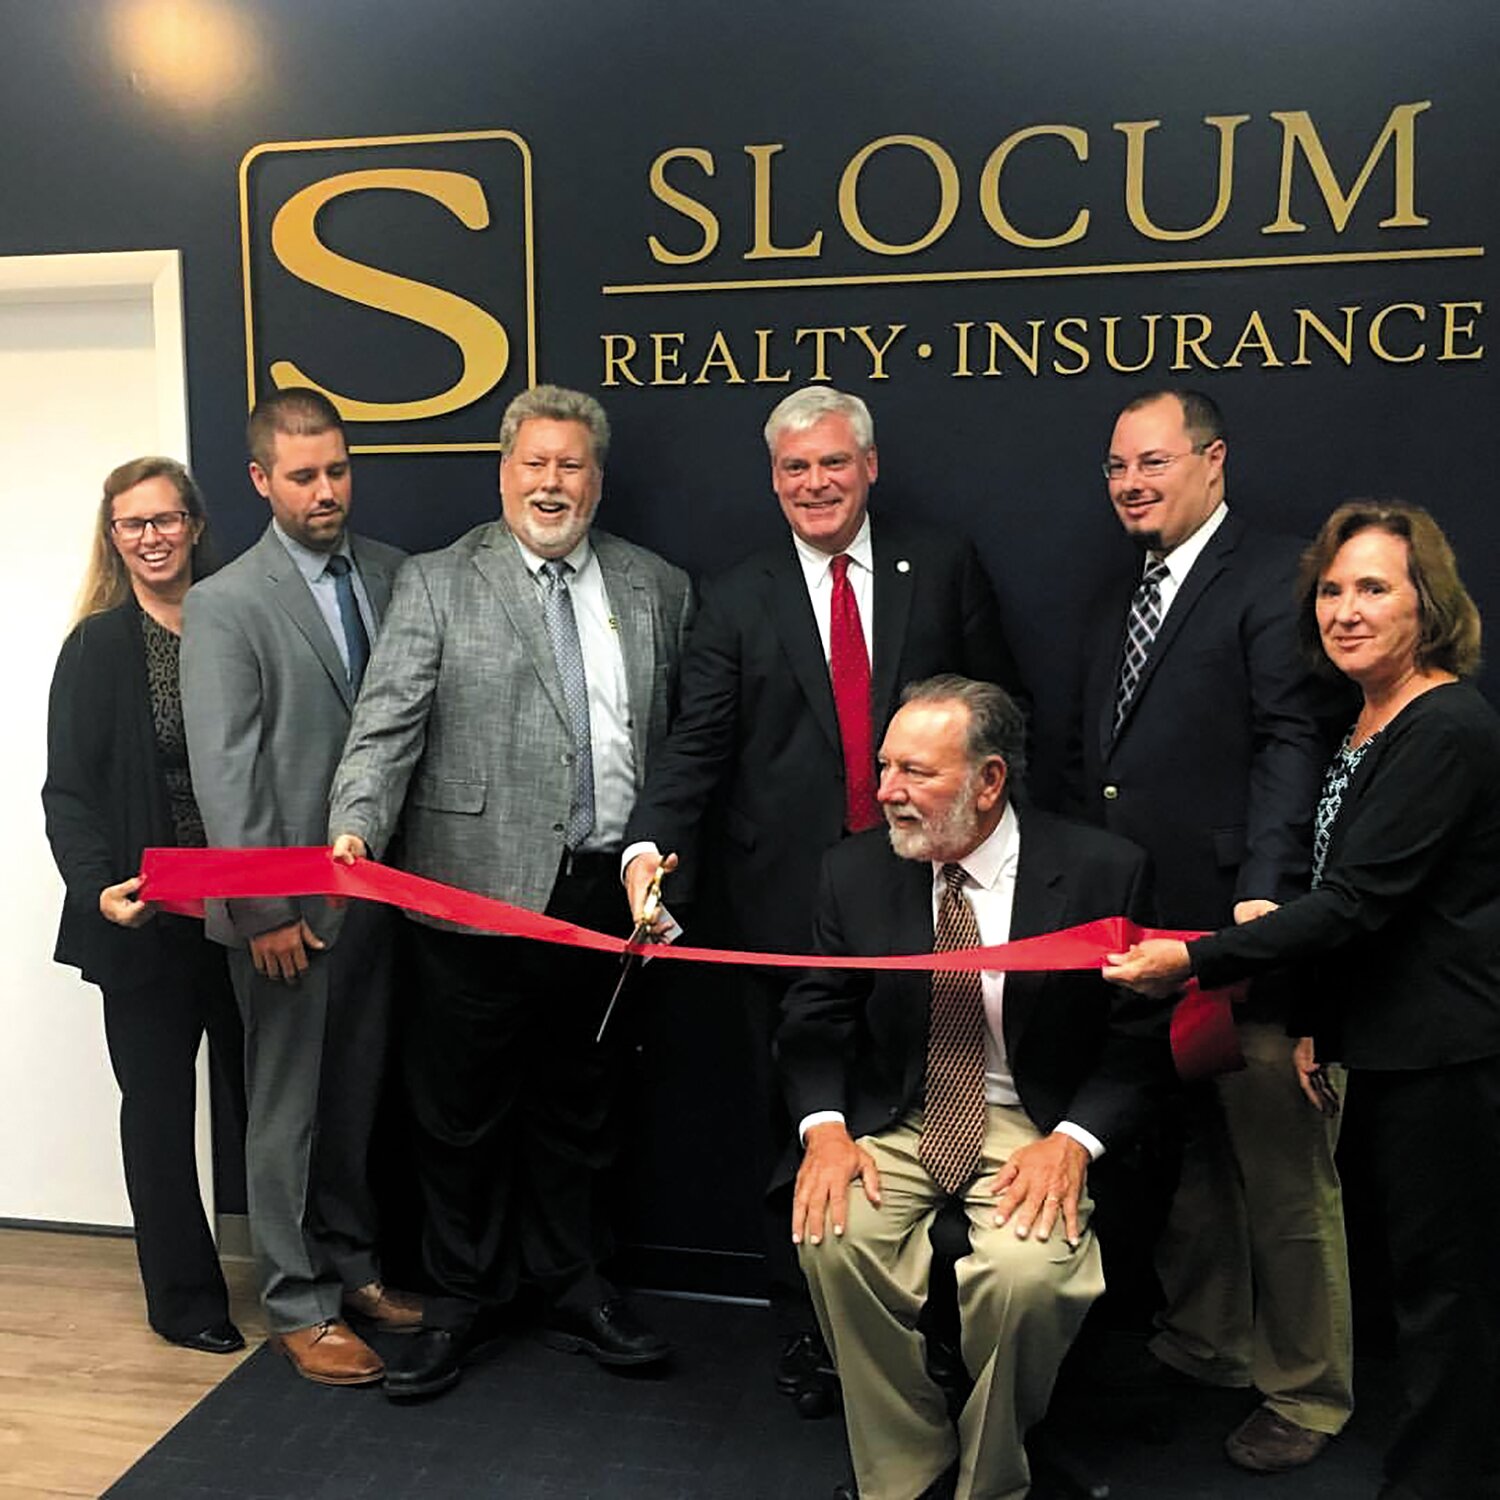 GROWING: From their humble beginnings in 1,100 sq ft on Greenwich Ave. to cutting the ribbon on their new 5,000 sq ft office on Centerville Road in , the family welcomed Mayor Scott Avedisian to do the honors. Pictured from left at the opening in 2017 are Lauren Slocum, Nick Slocum, Phil Slocum, Mayor Scott Avedisian, Bob Slocum, Chris Slocum and Donna Slocum.